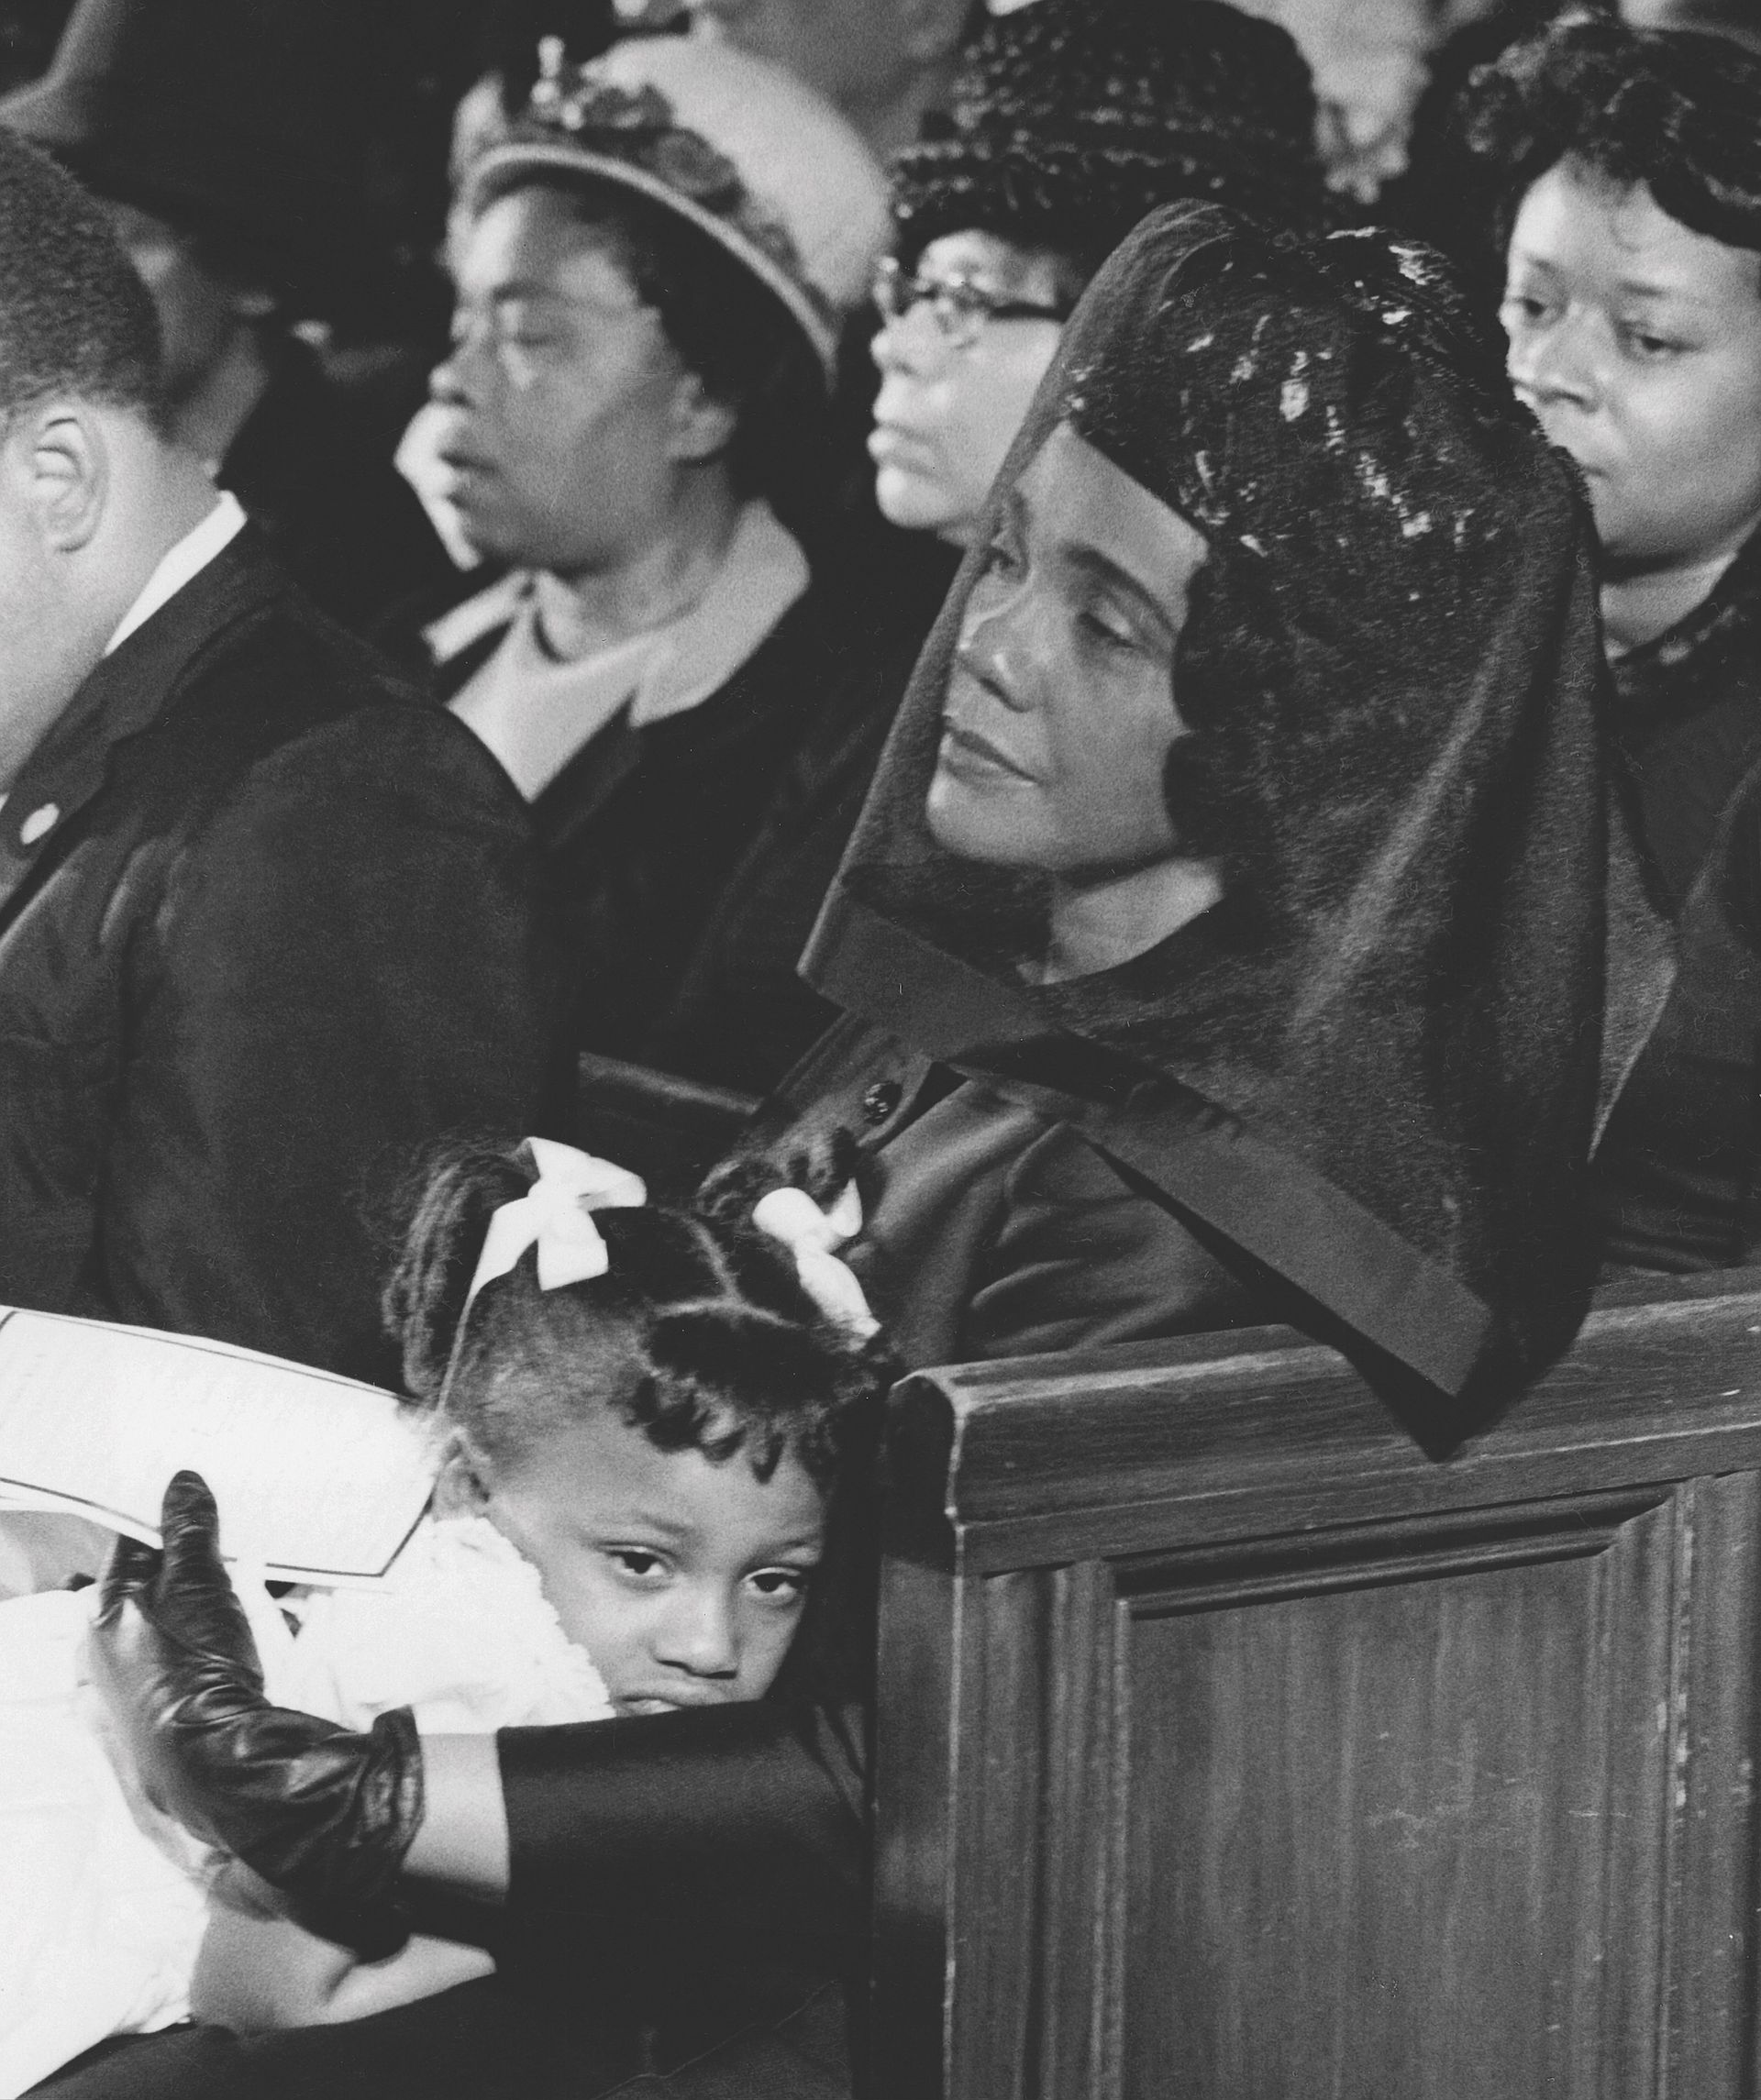 Pulitzer Prize-winning photograph by Moneta Sleet Jr. of Coretta Scott King consoling her daughter, Bernice, at the funeral of Dr. Martin Luther King Jr. in April 1968. Moneta Sleet Jr. /Ebony Collection. Johnson Publishing Company Archive. Courtesy Ford Foundation, J. Paul Getty Trust, John D. and Catherine T. MacArthur Foundation, Andrew W. Mellon Foundation, and Smithsonian Institution